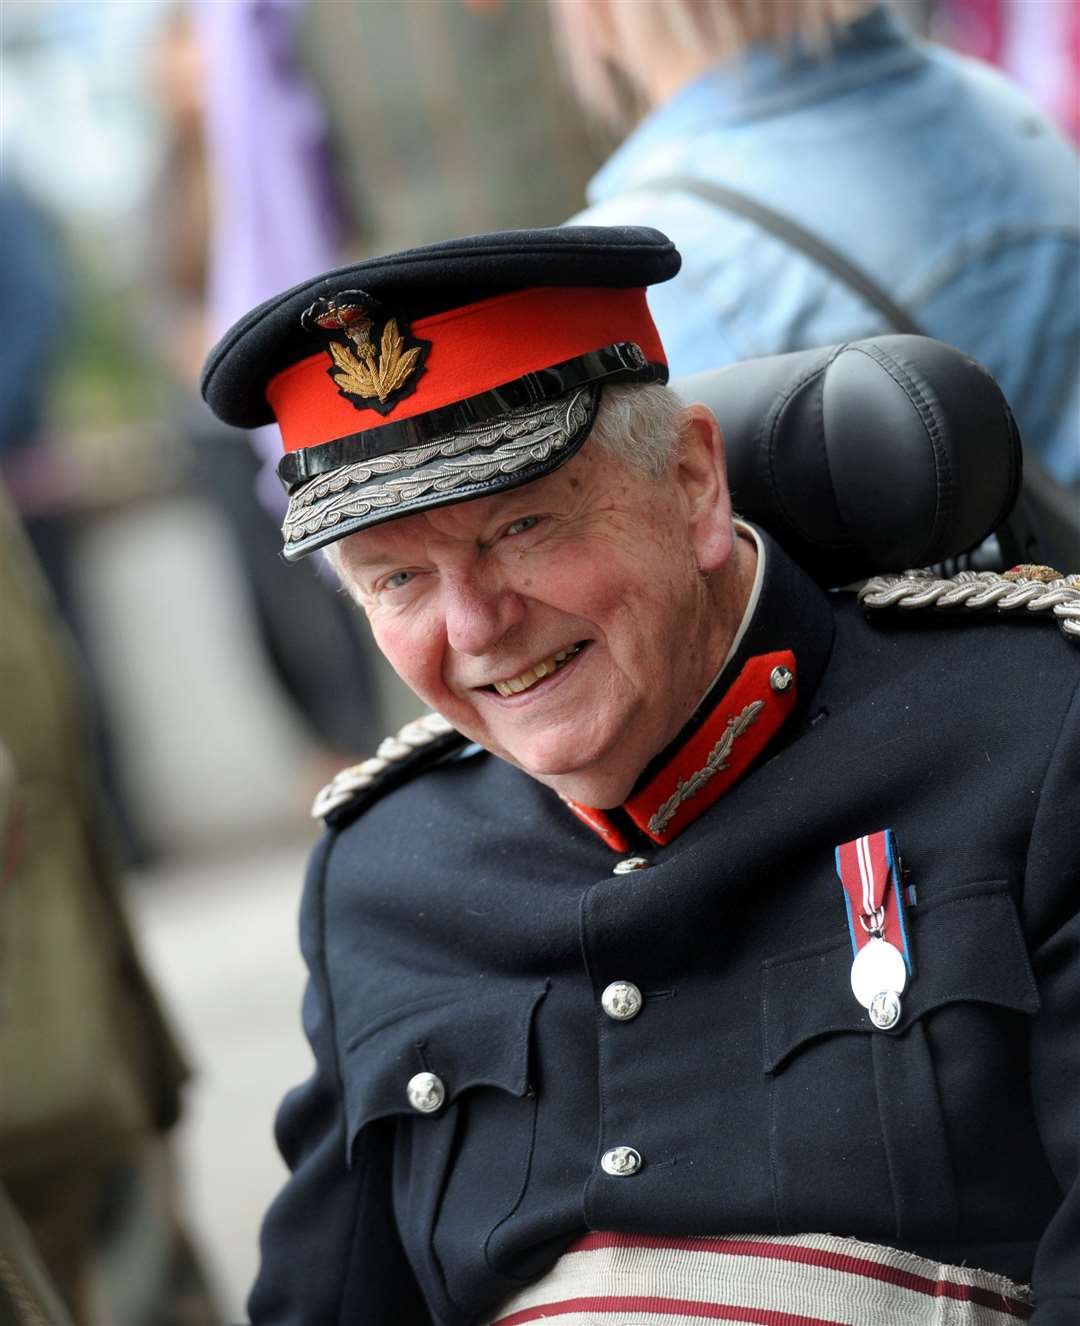 The Lord Lieutenant Donald Cameron of Lochiel pictured during a visit of the then Duke of Rothesay to Campbell's of Beauly in 2019.